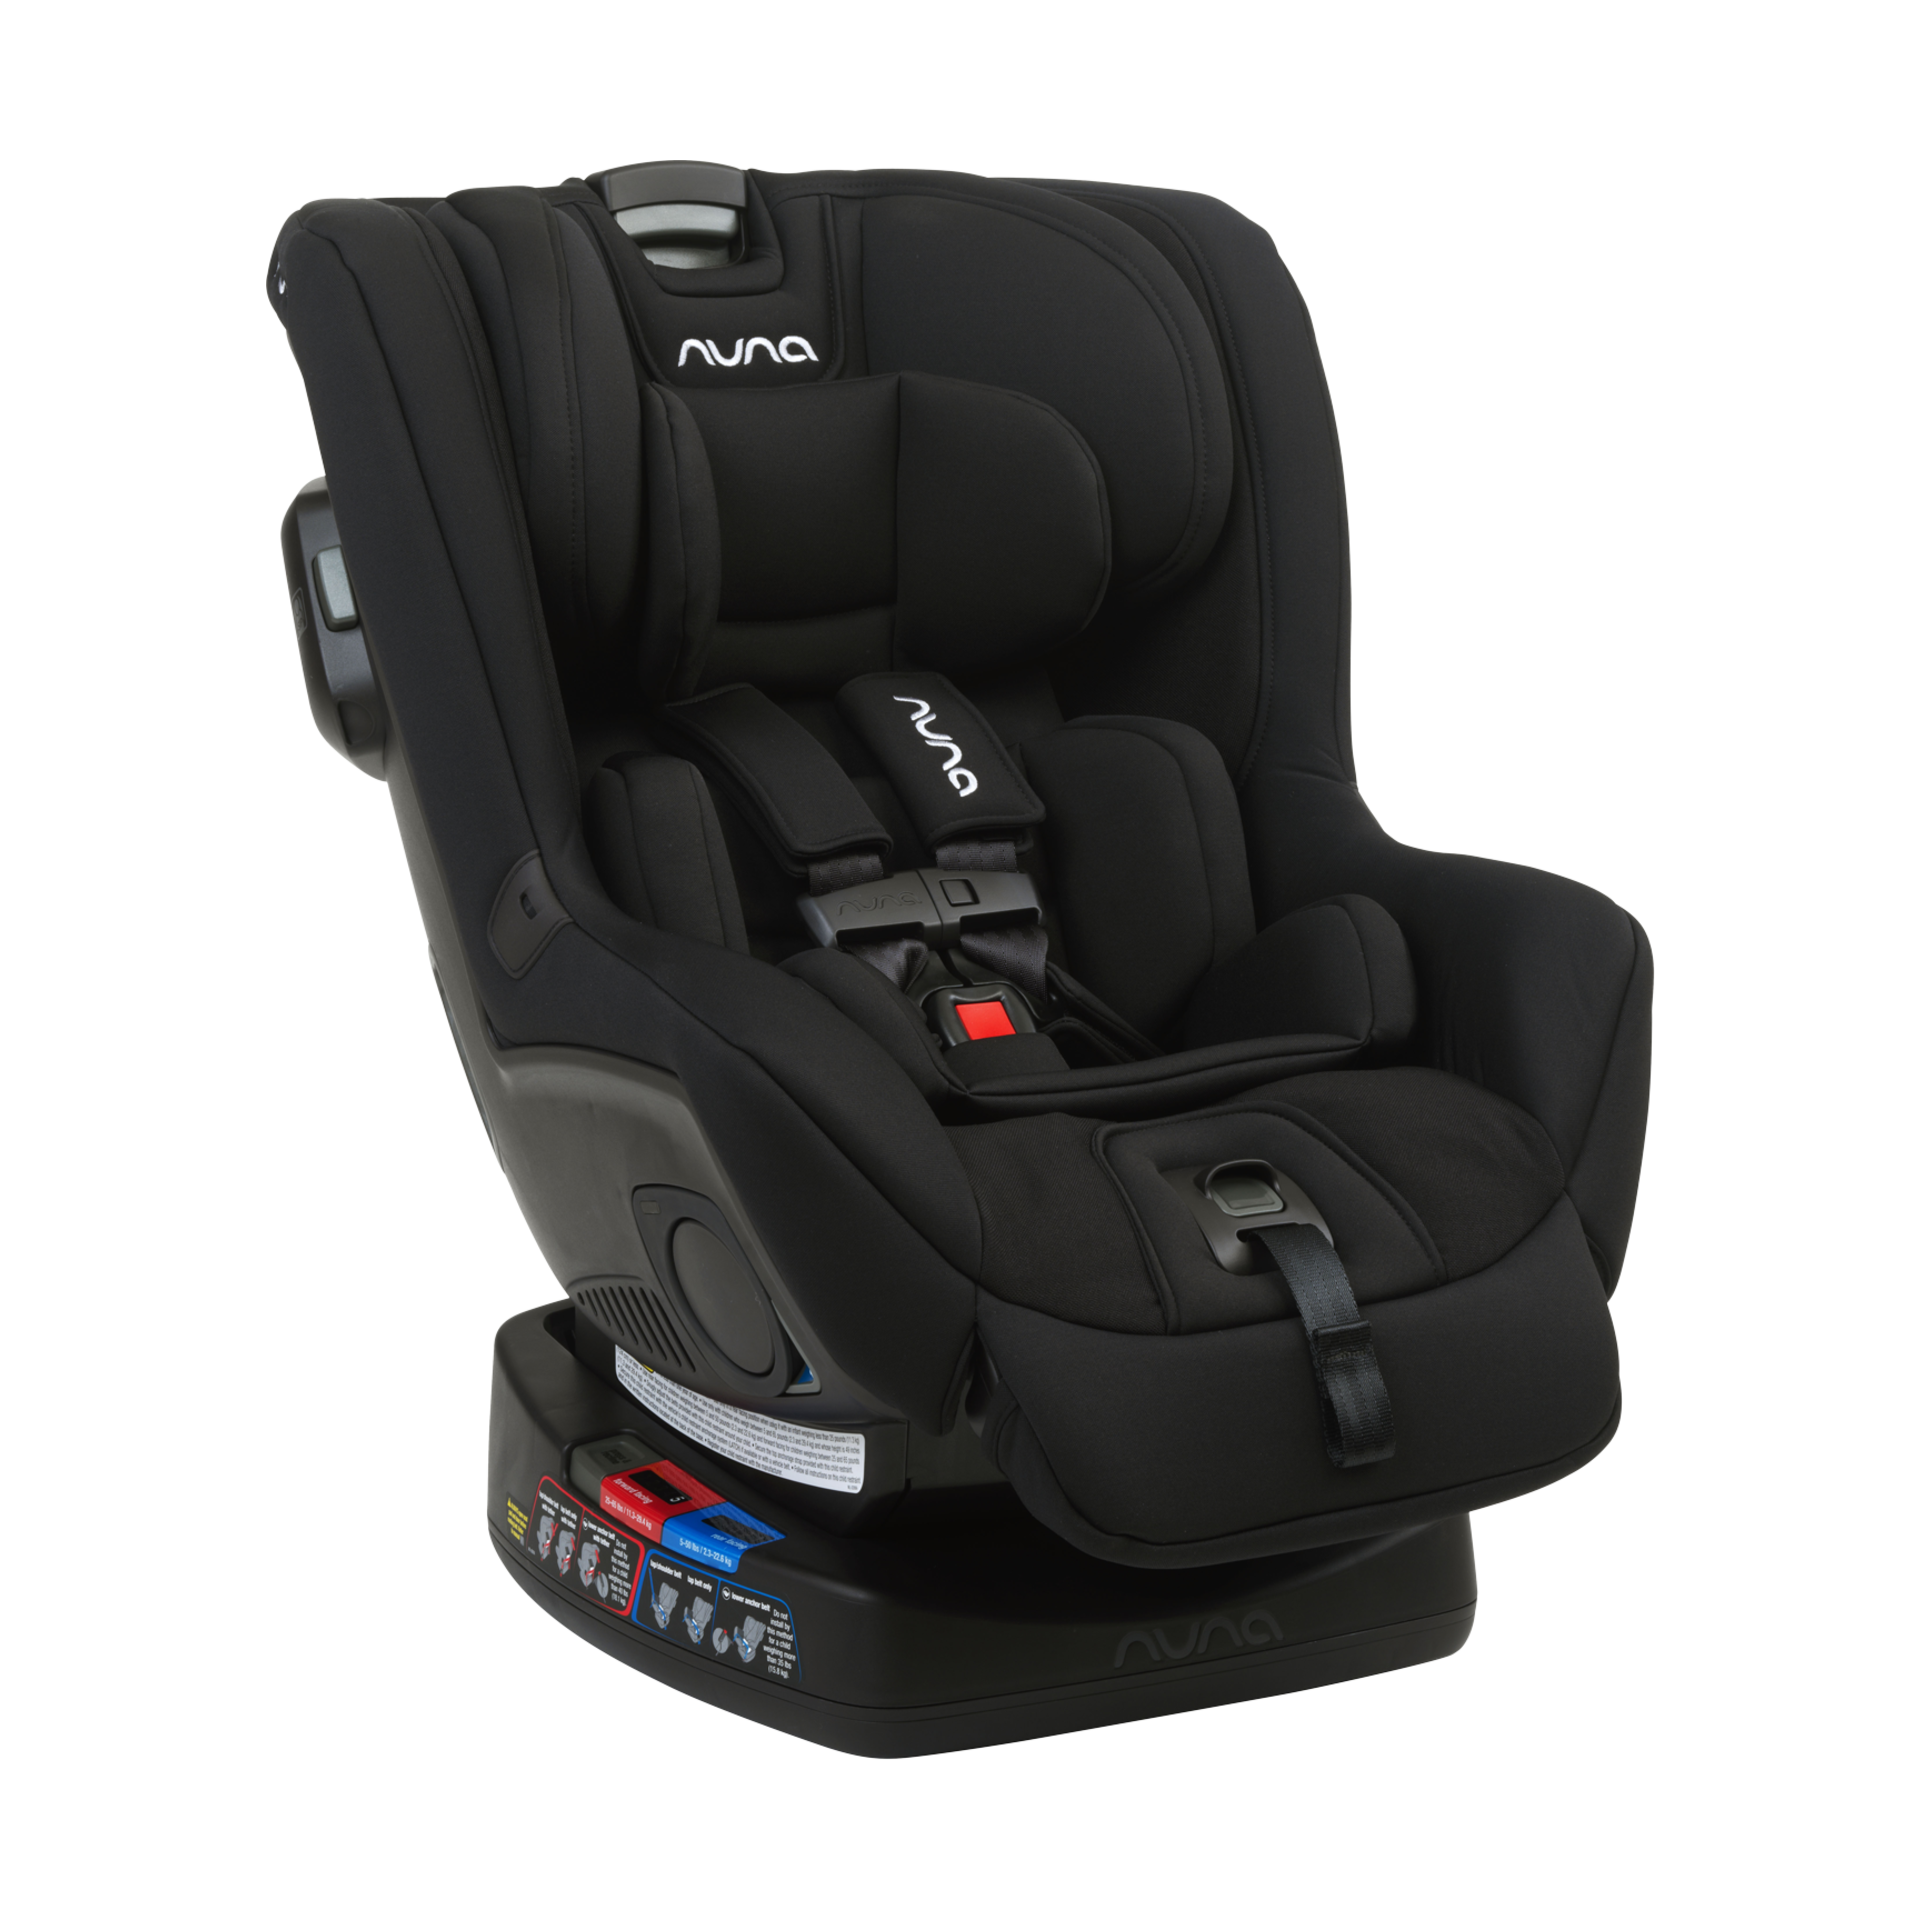 convertible car seat weight limit